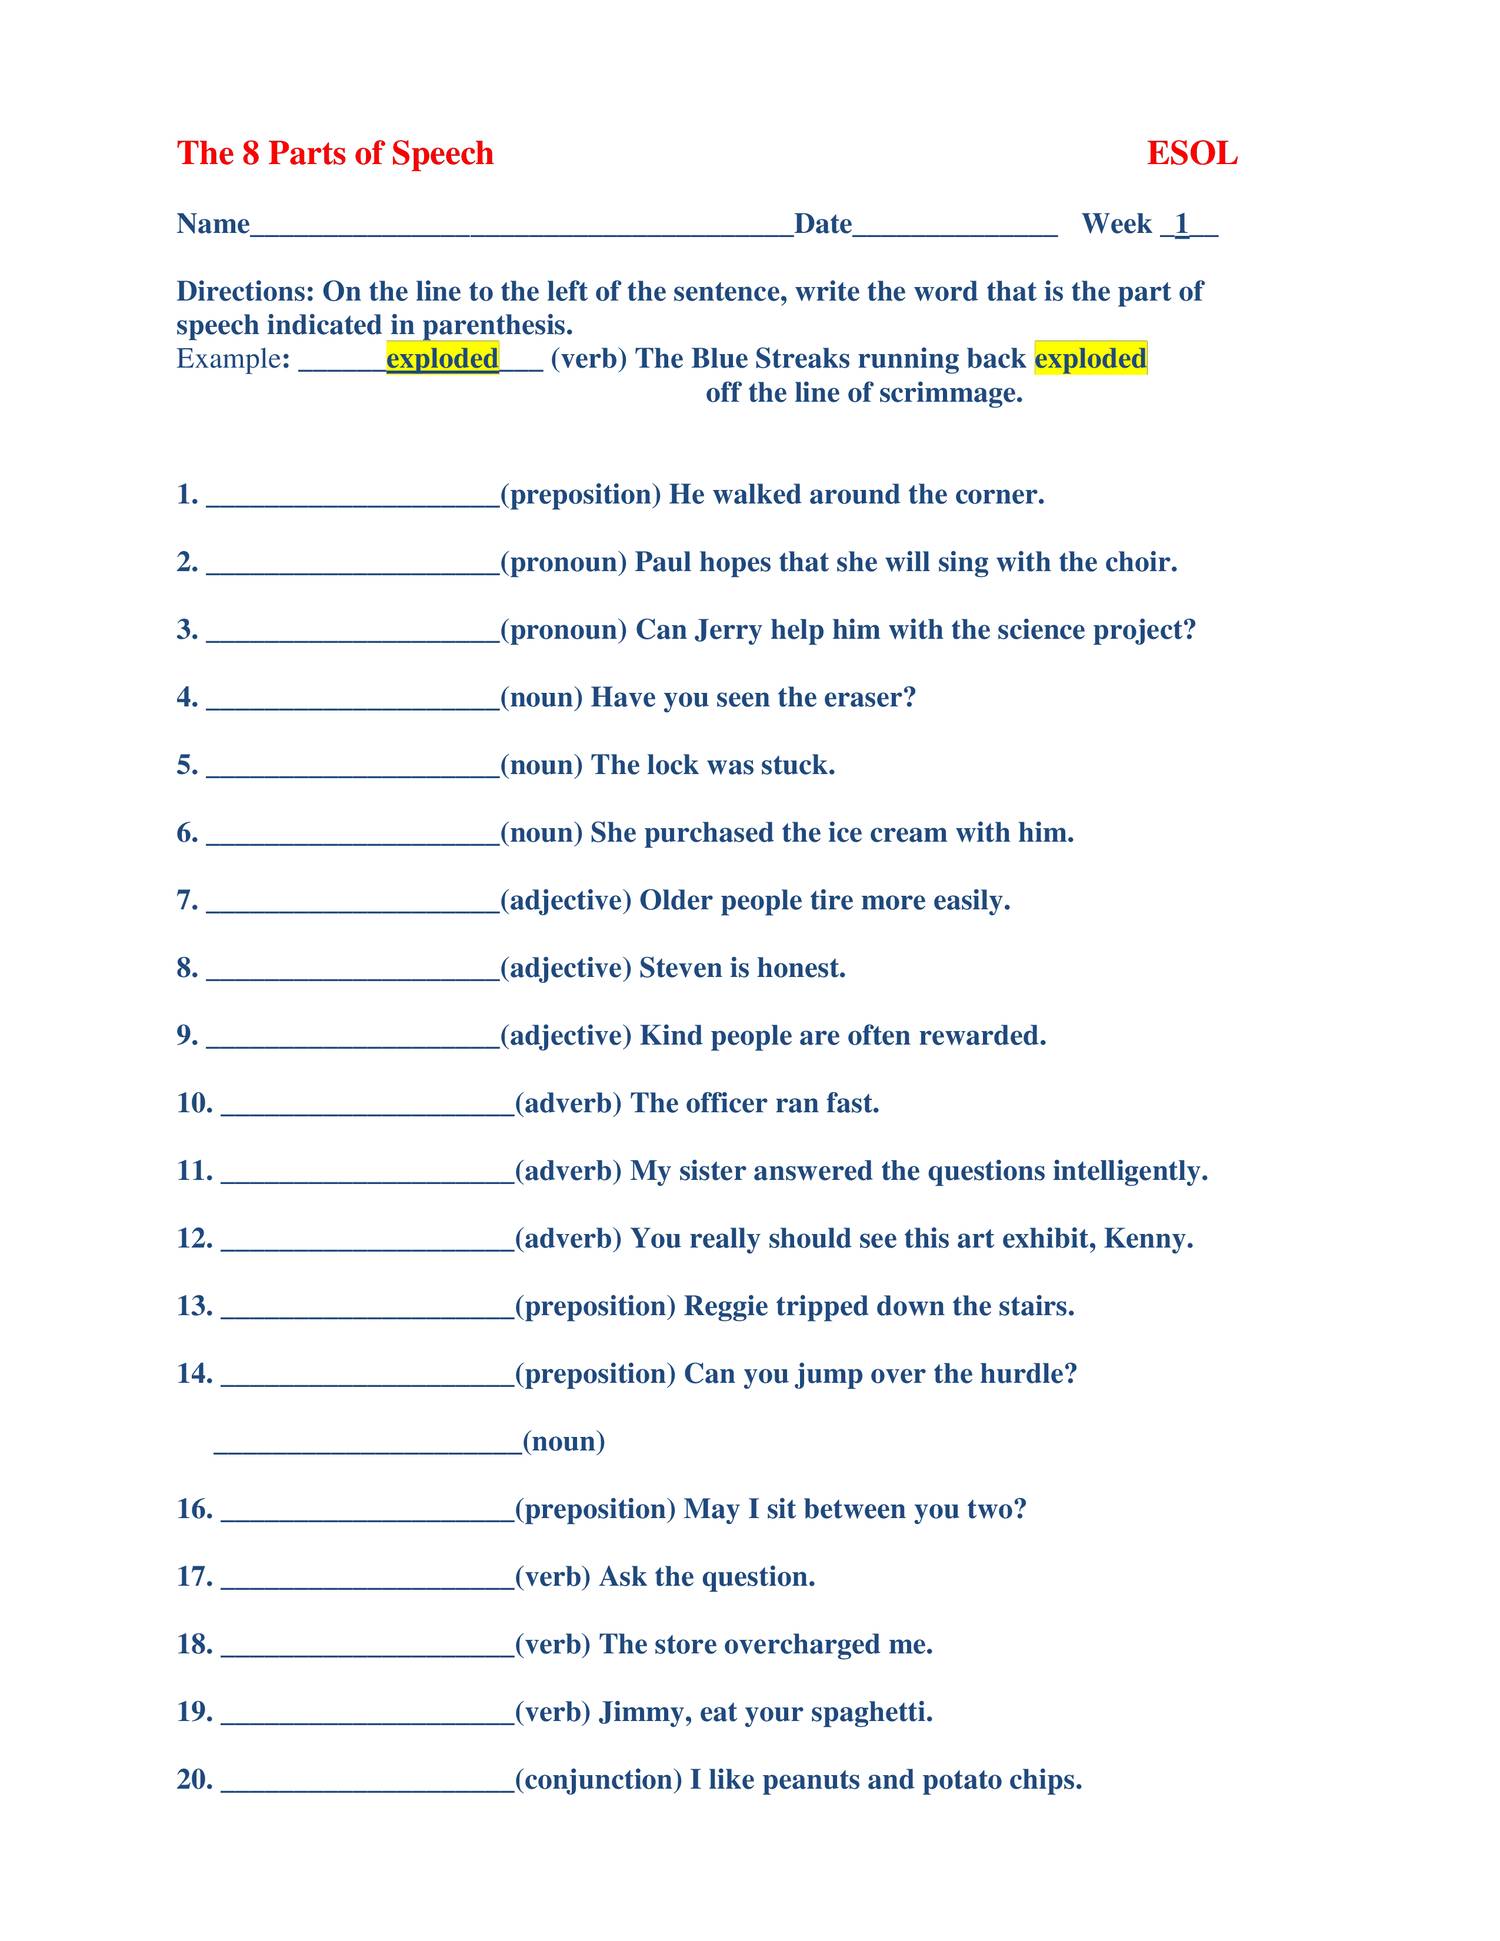 week-1-the-8-parts-of-speech-worksheet-docx-docdroid